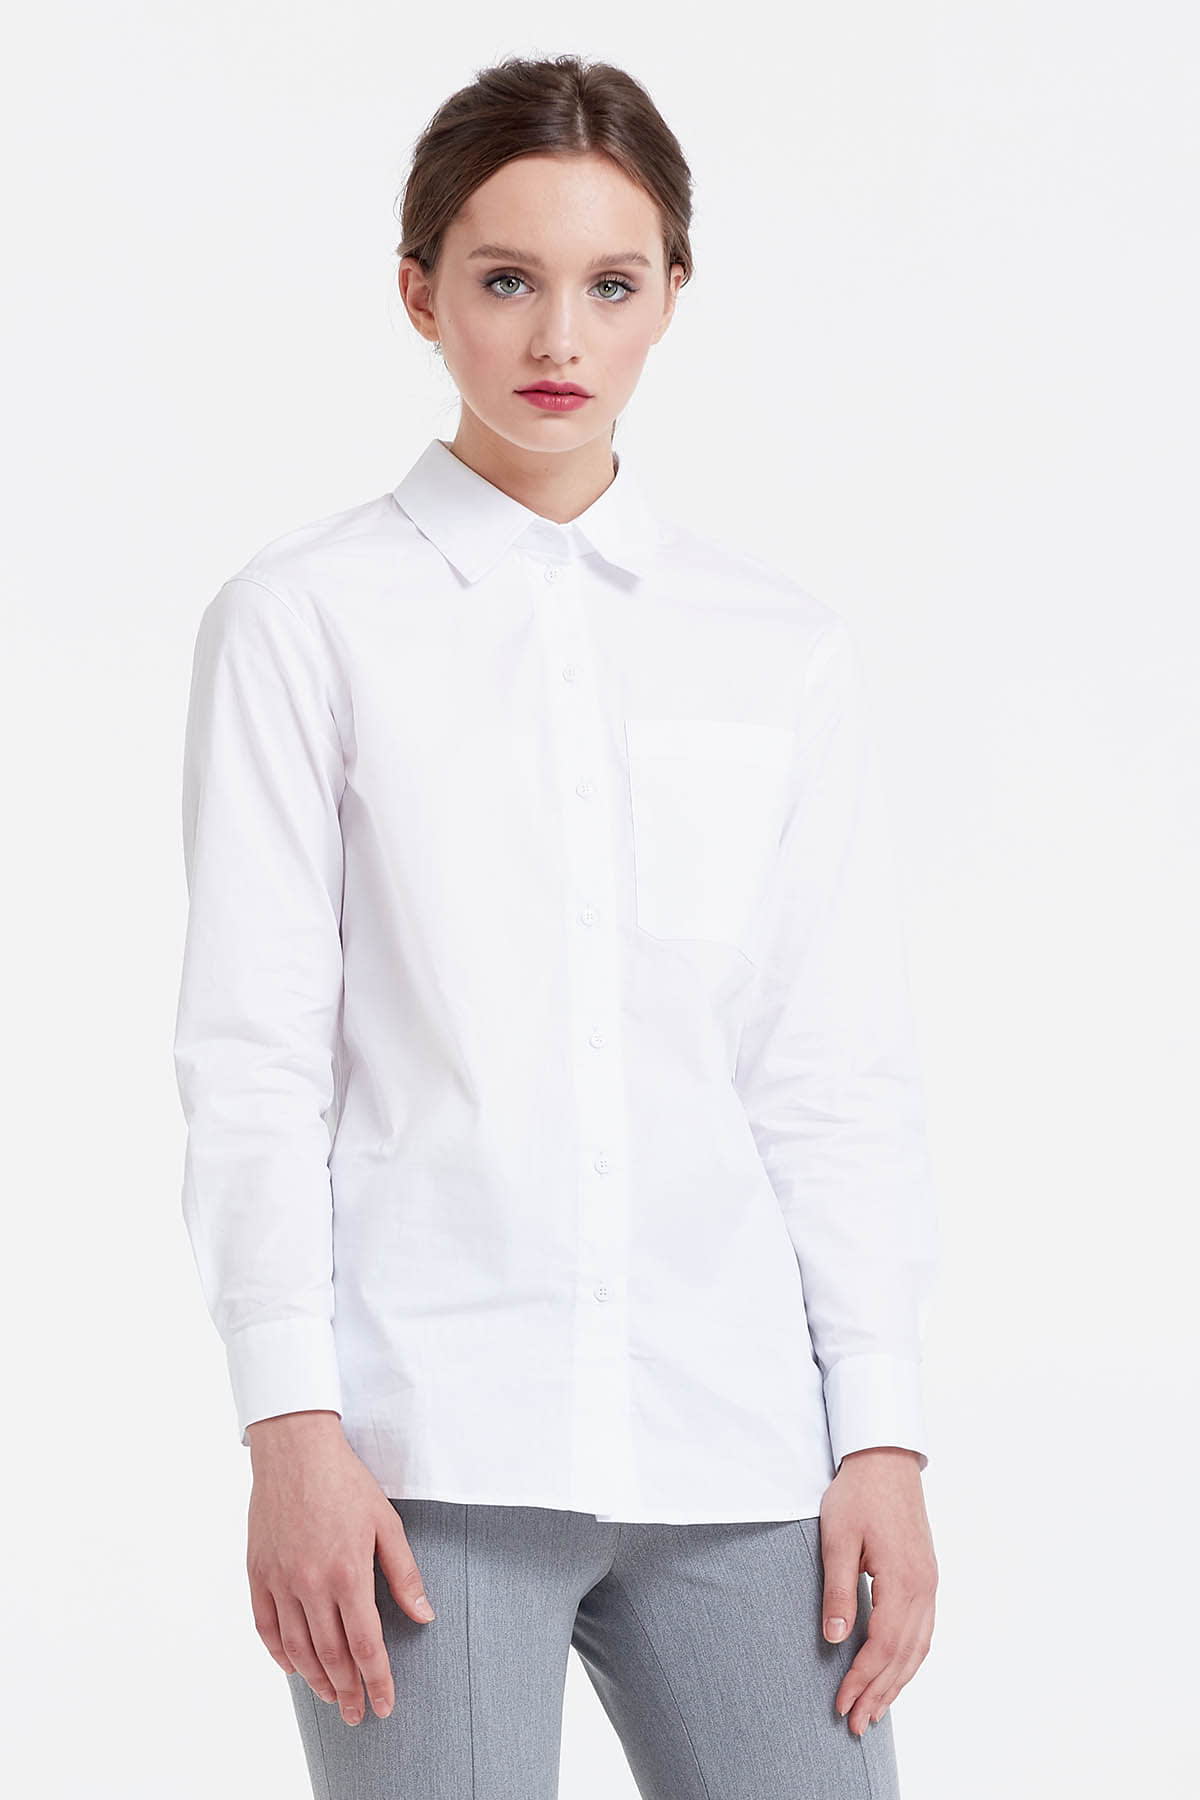 White shirt with a pocket , photo 2